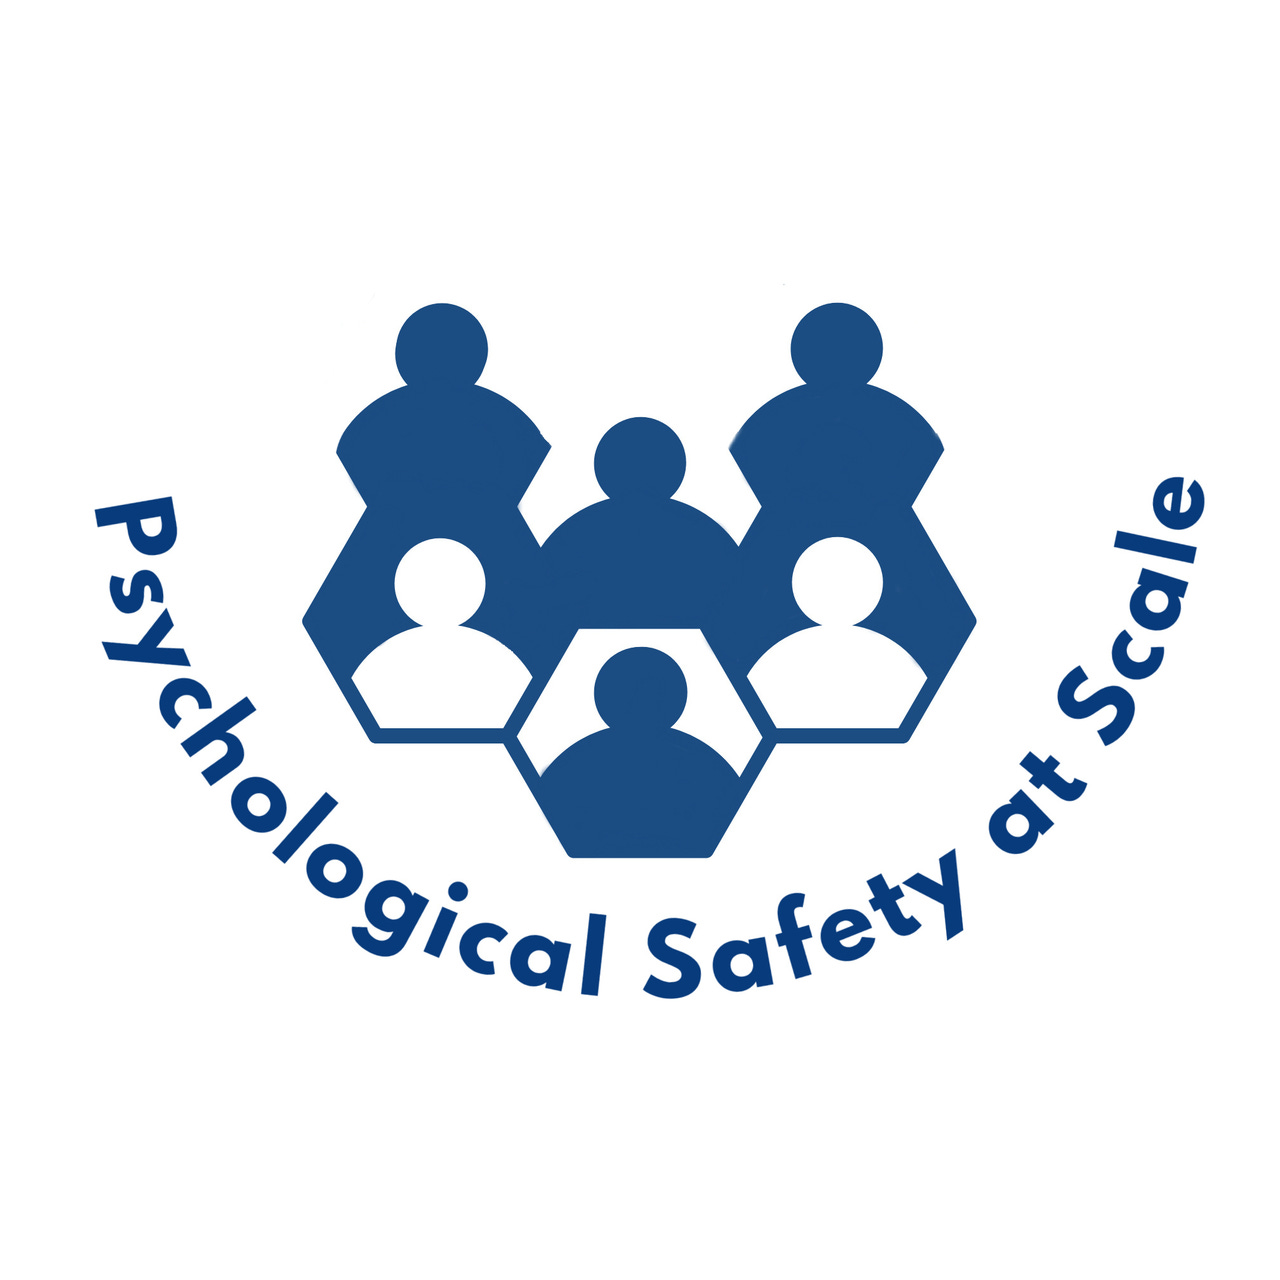 Psychological Safety at Scale